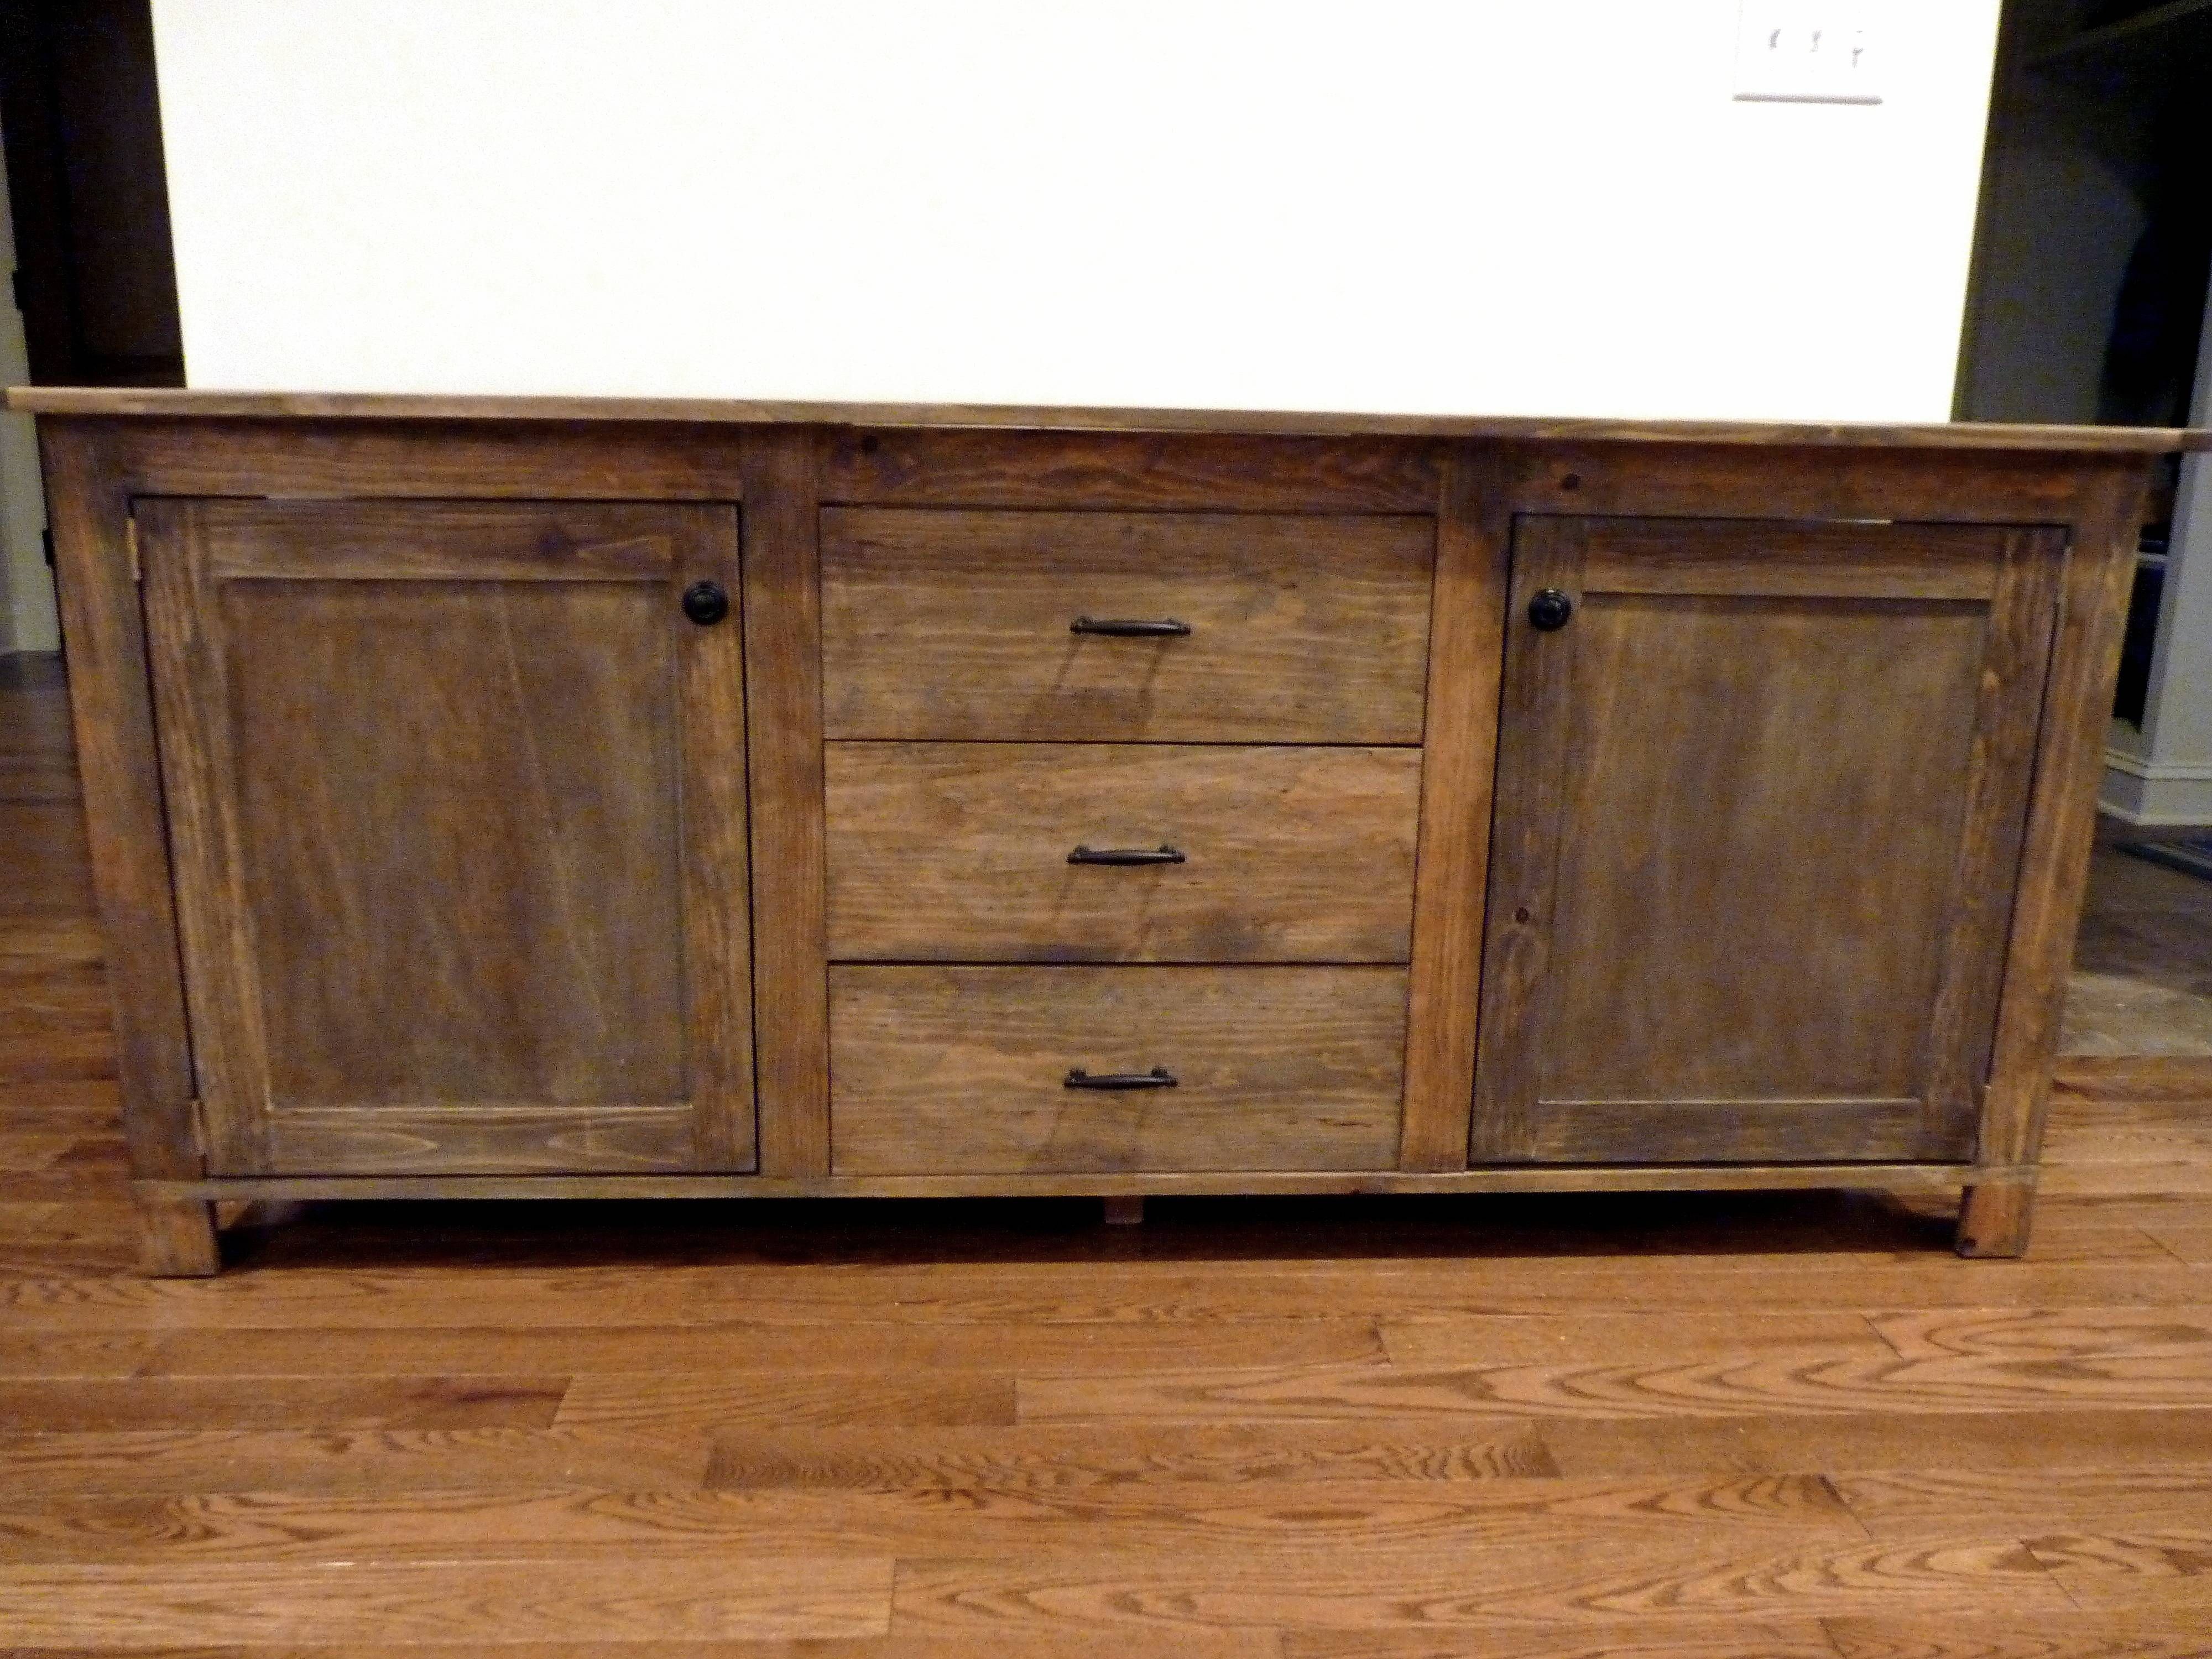 Ana White | Rustic Sideboard – Diy Projects Within Rustic Sideboards Buffets (View 2 of 15)